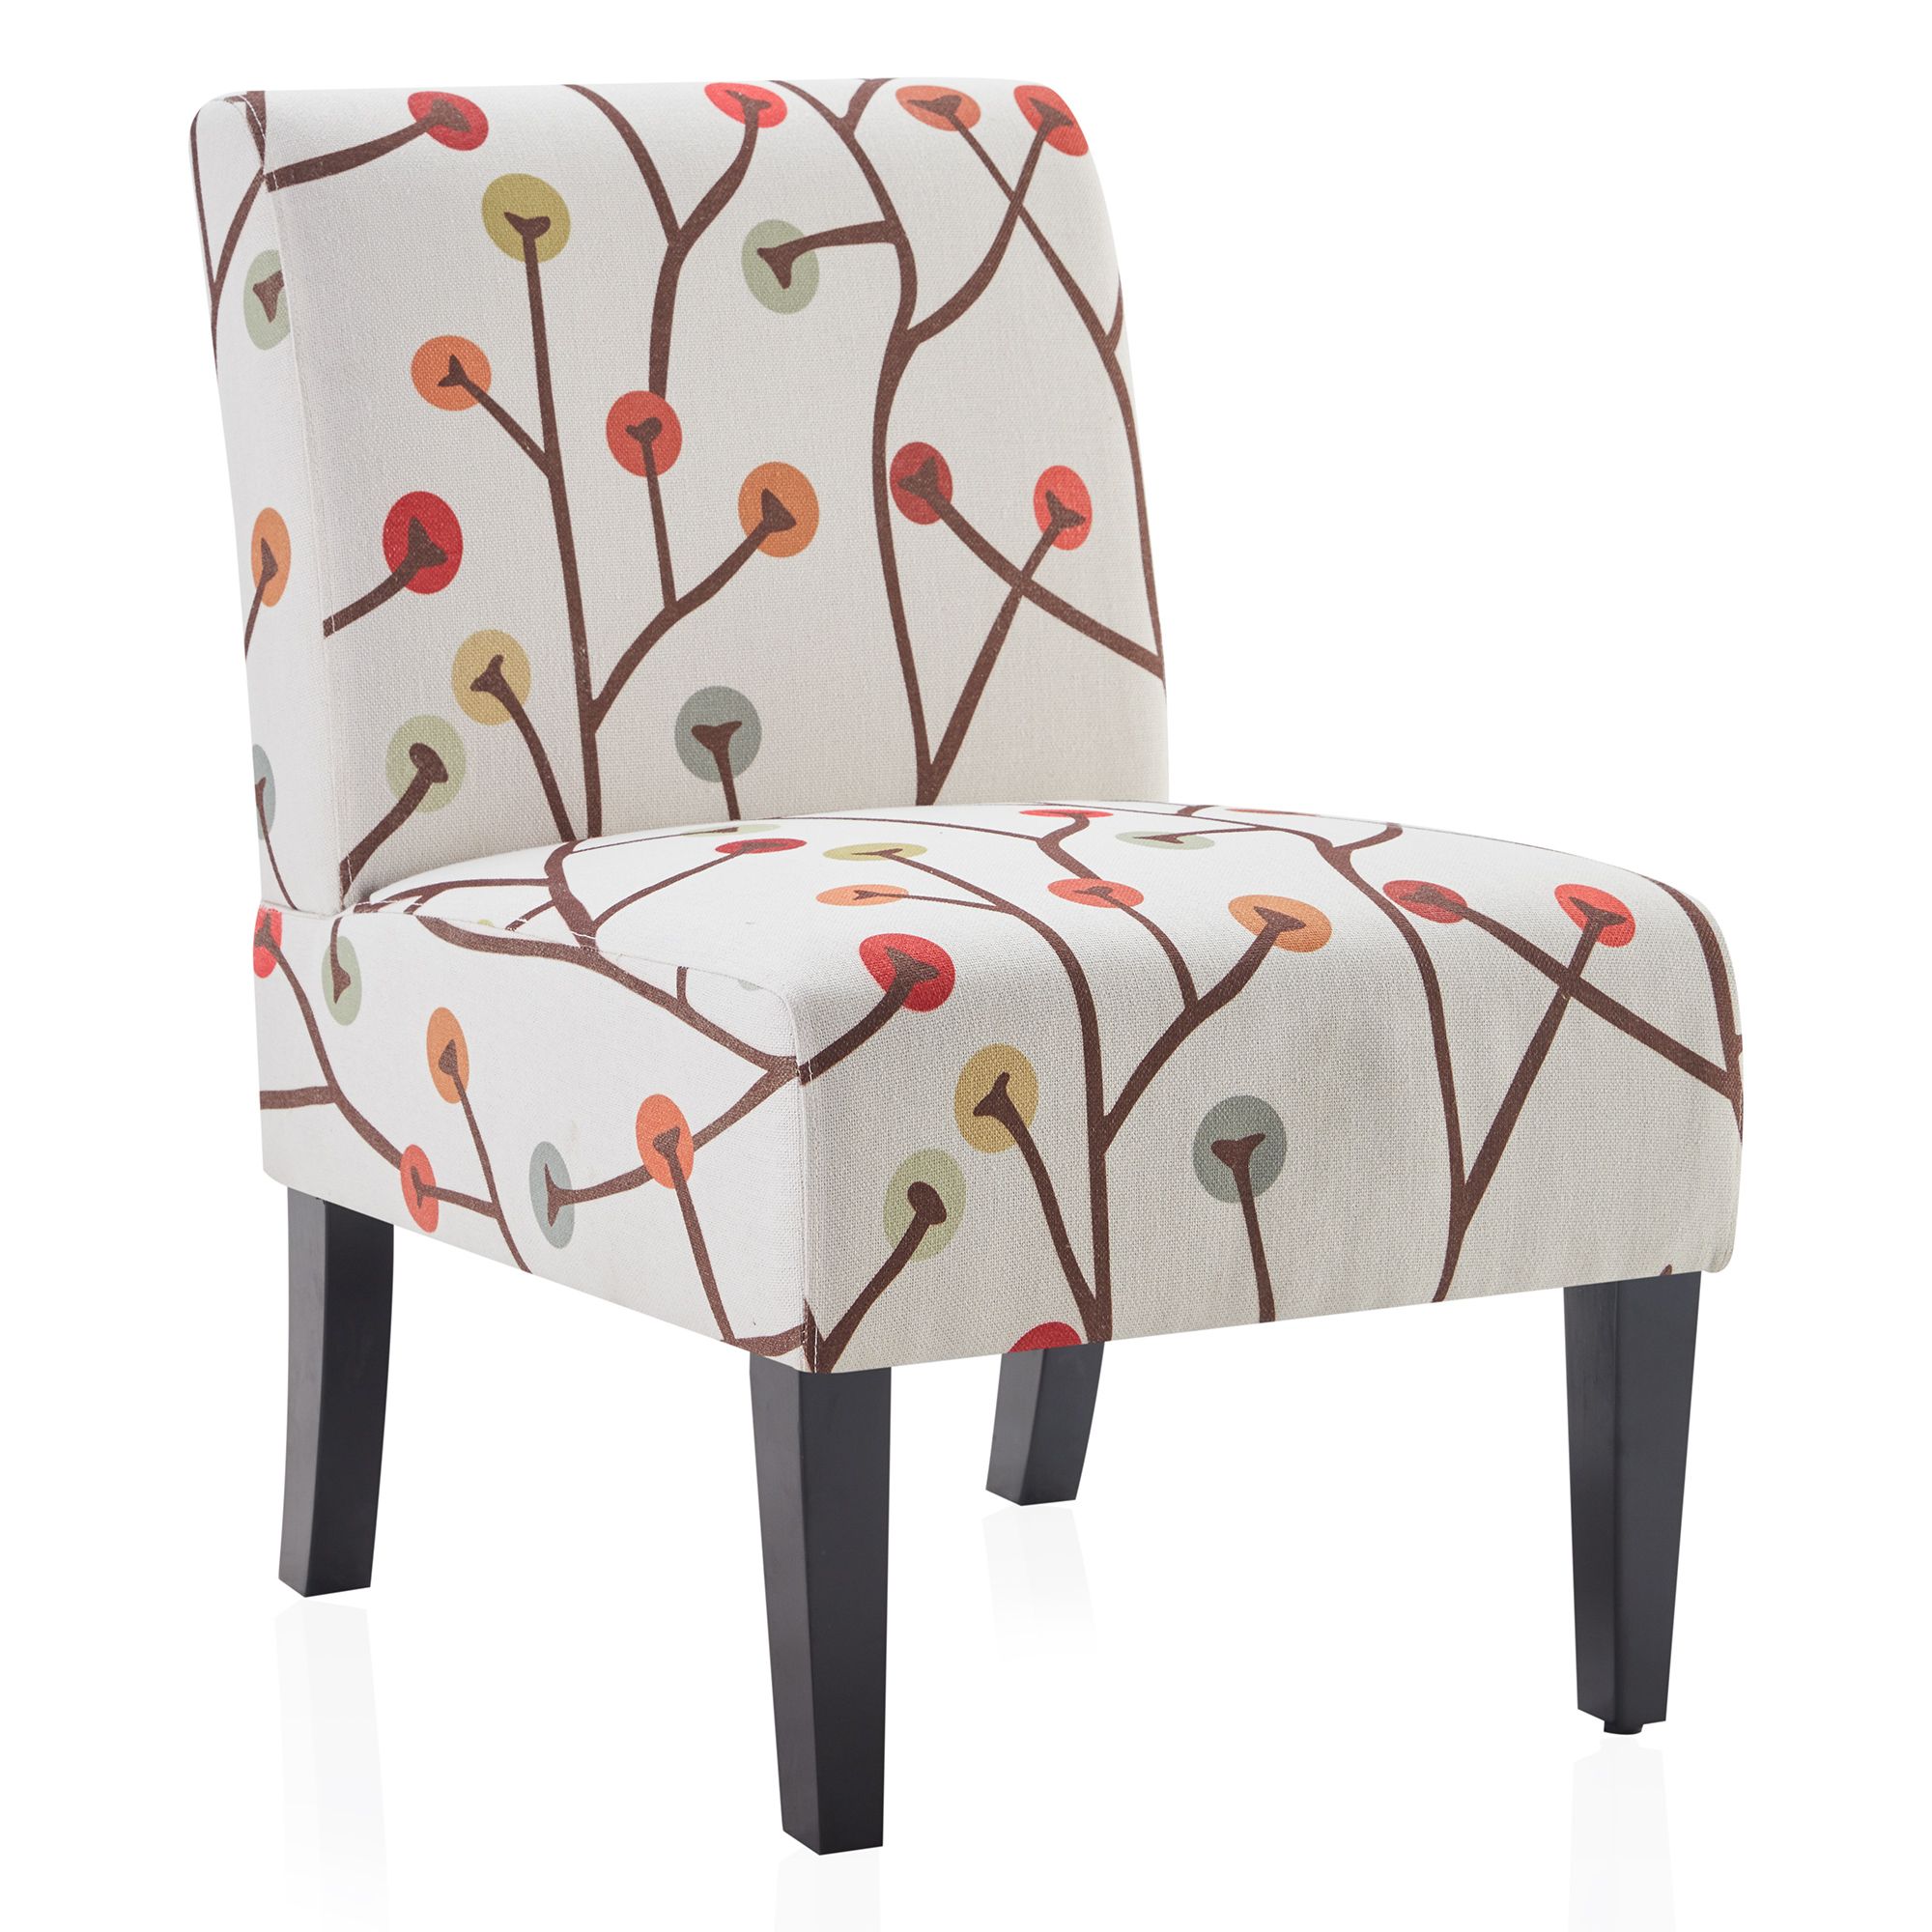 Belleze Armless Contemporary Upholstered Single Curved Throughout Armless Upholstered Slipper Chairs (View 8 of 15)